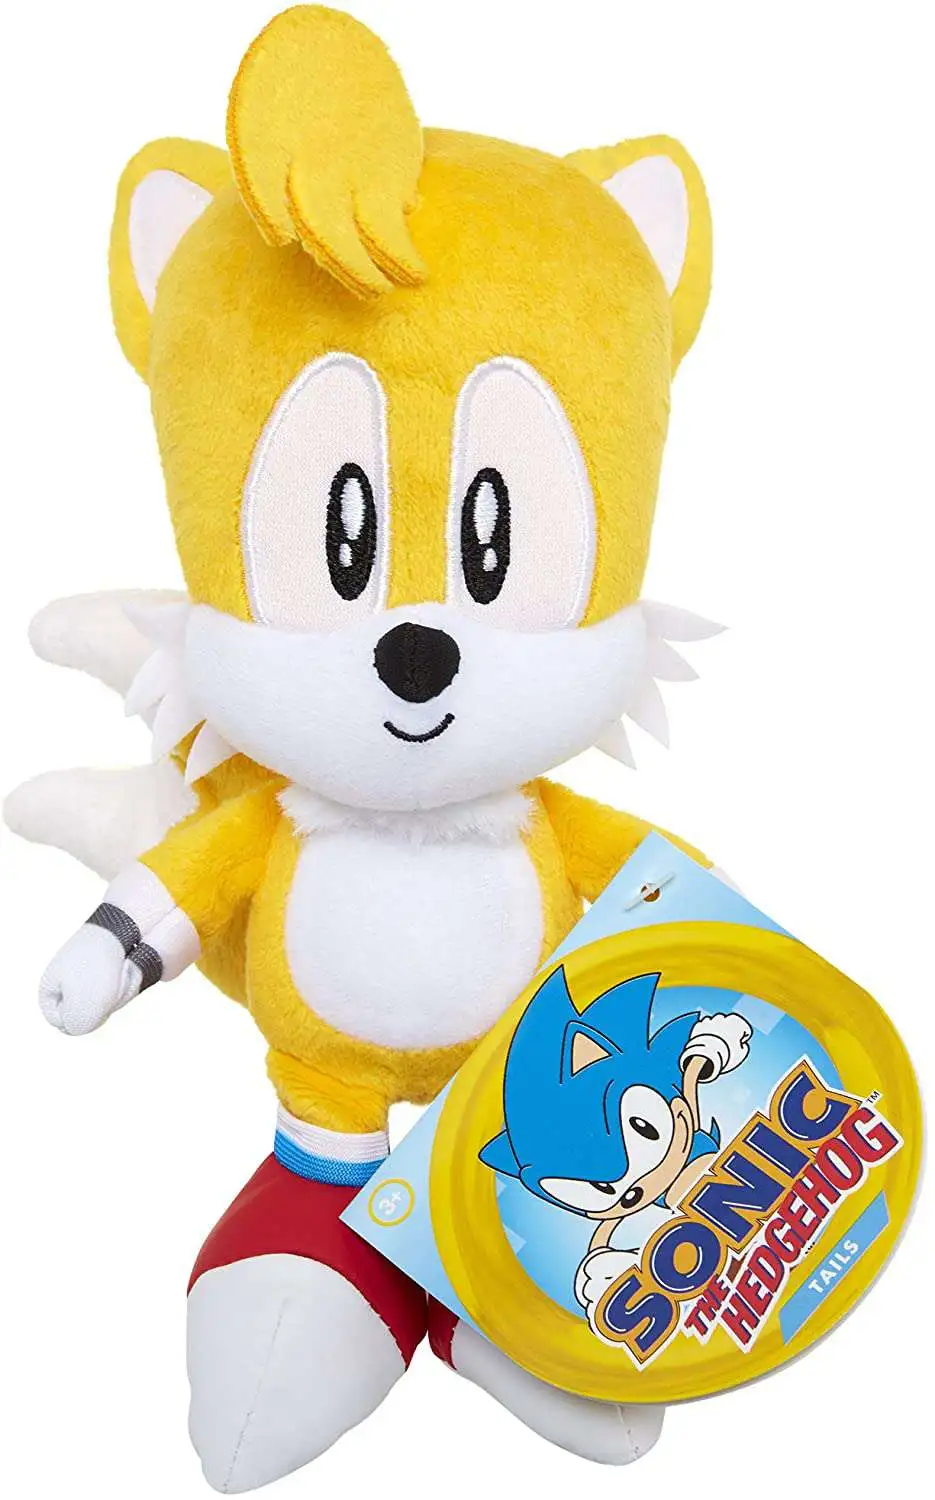 Hot Sale Sonic The Hedgehog Plush Doll Classic Anime Tails Amy